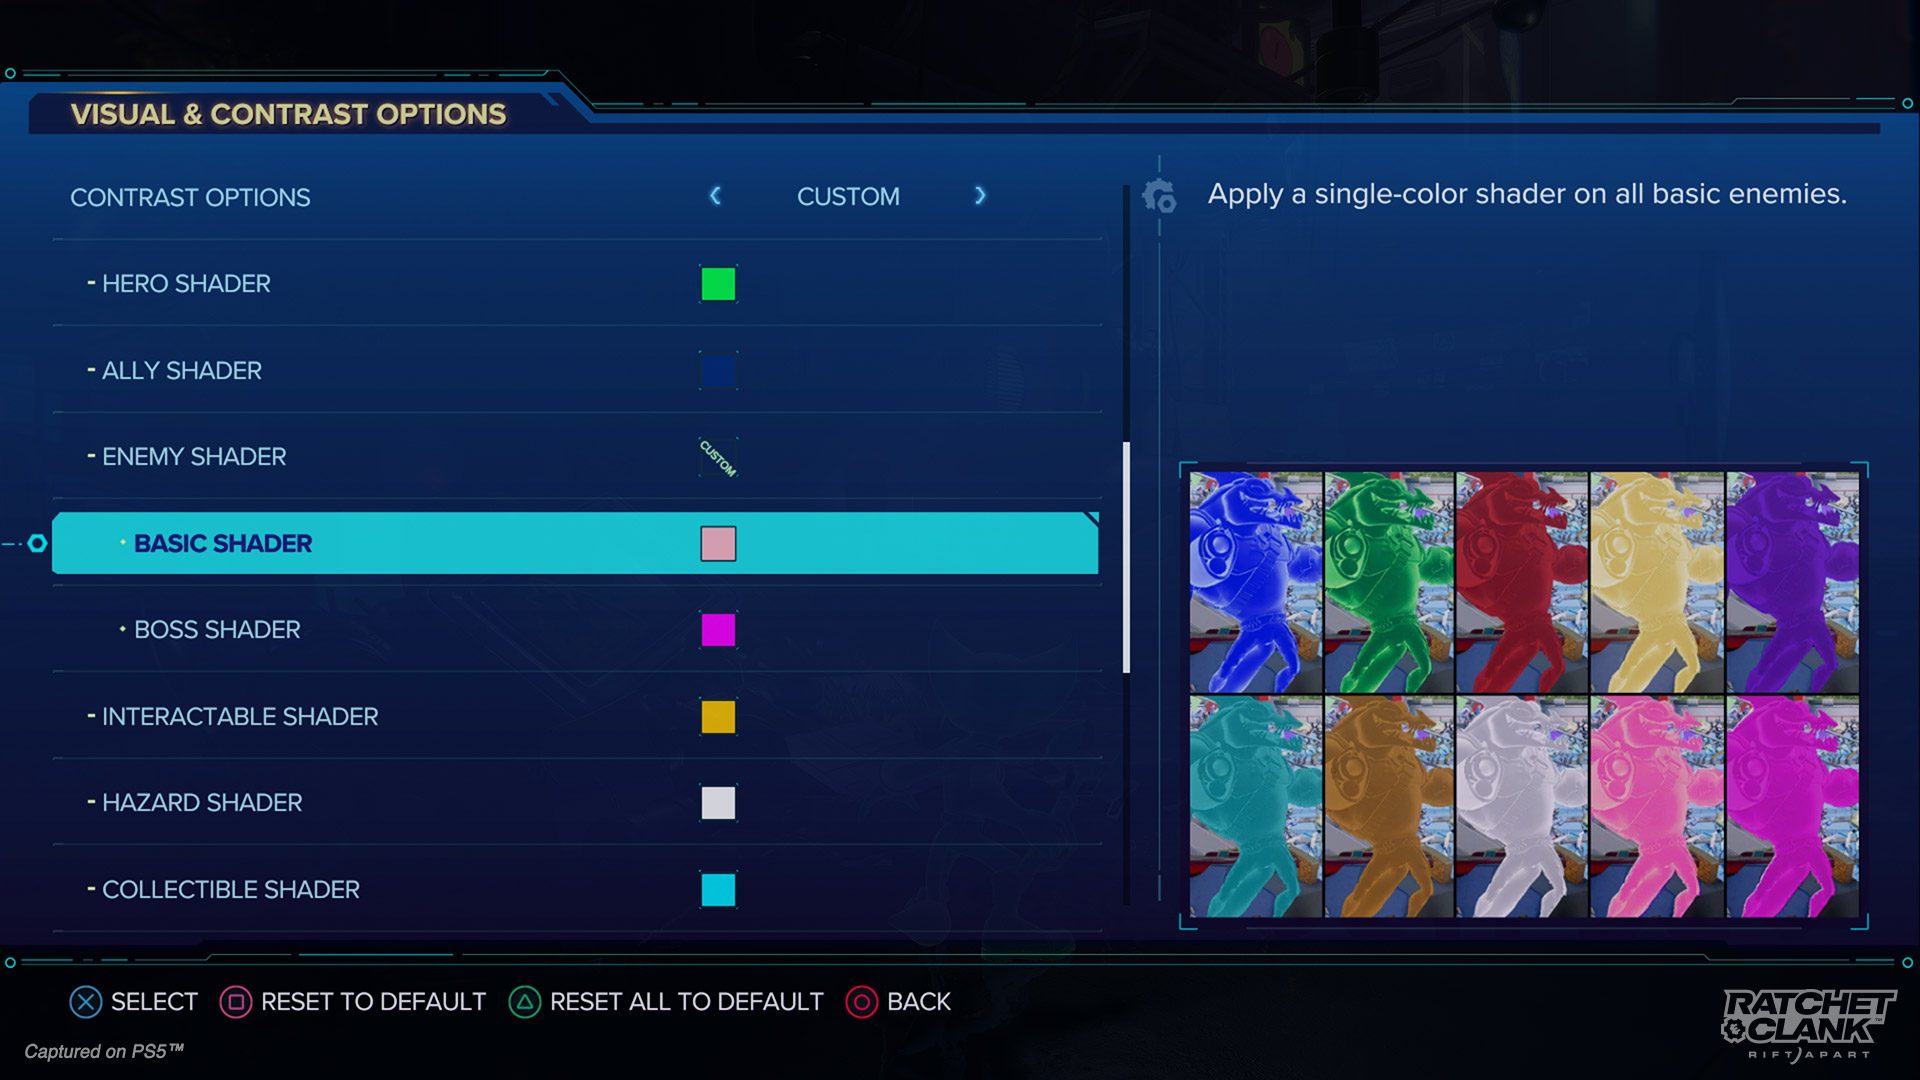 Contrast Options menu showing the full list of Shaders: Hero, Ally, Basic Enemy, Boss Enemy, Interactable, Hazard, and Collectible.